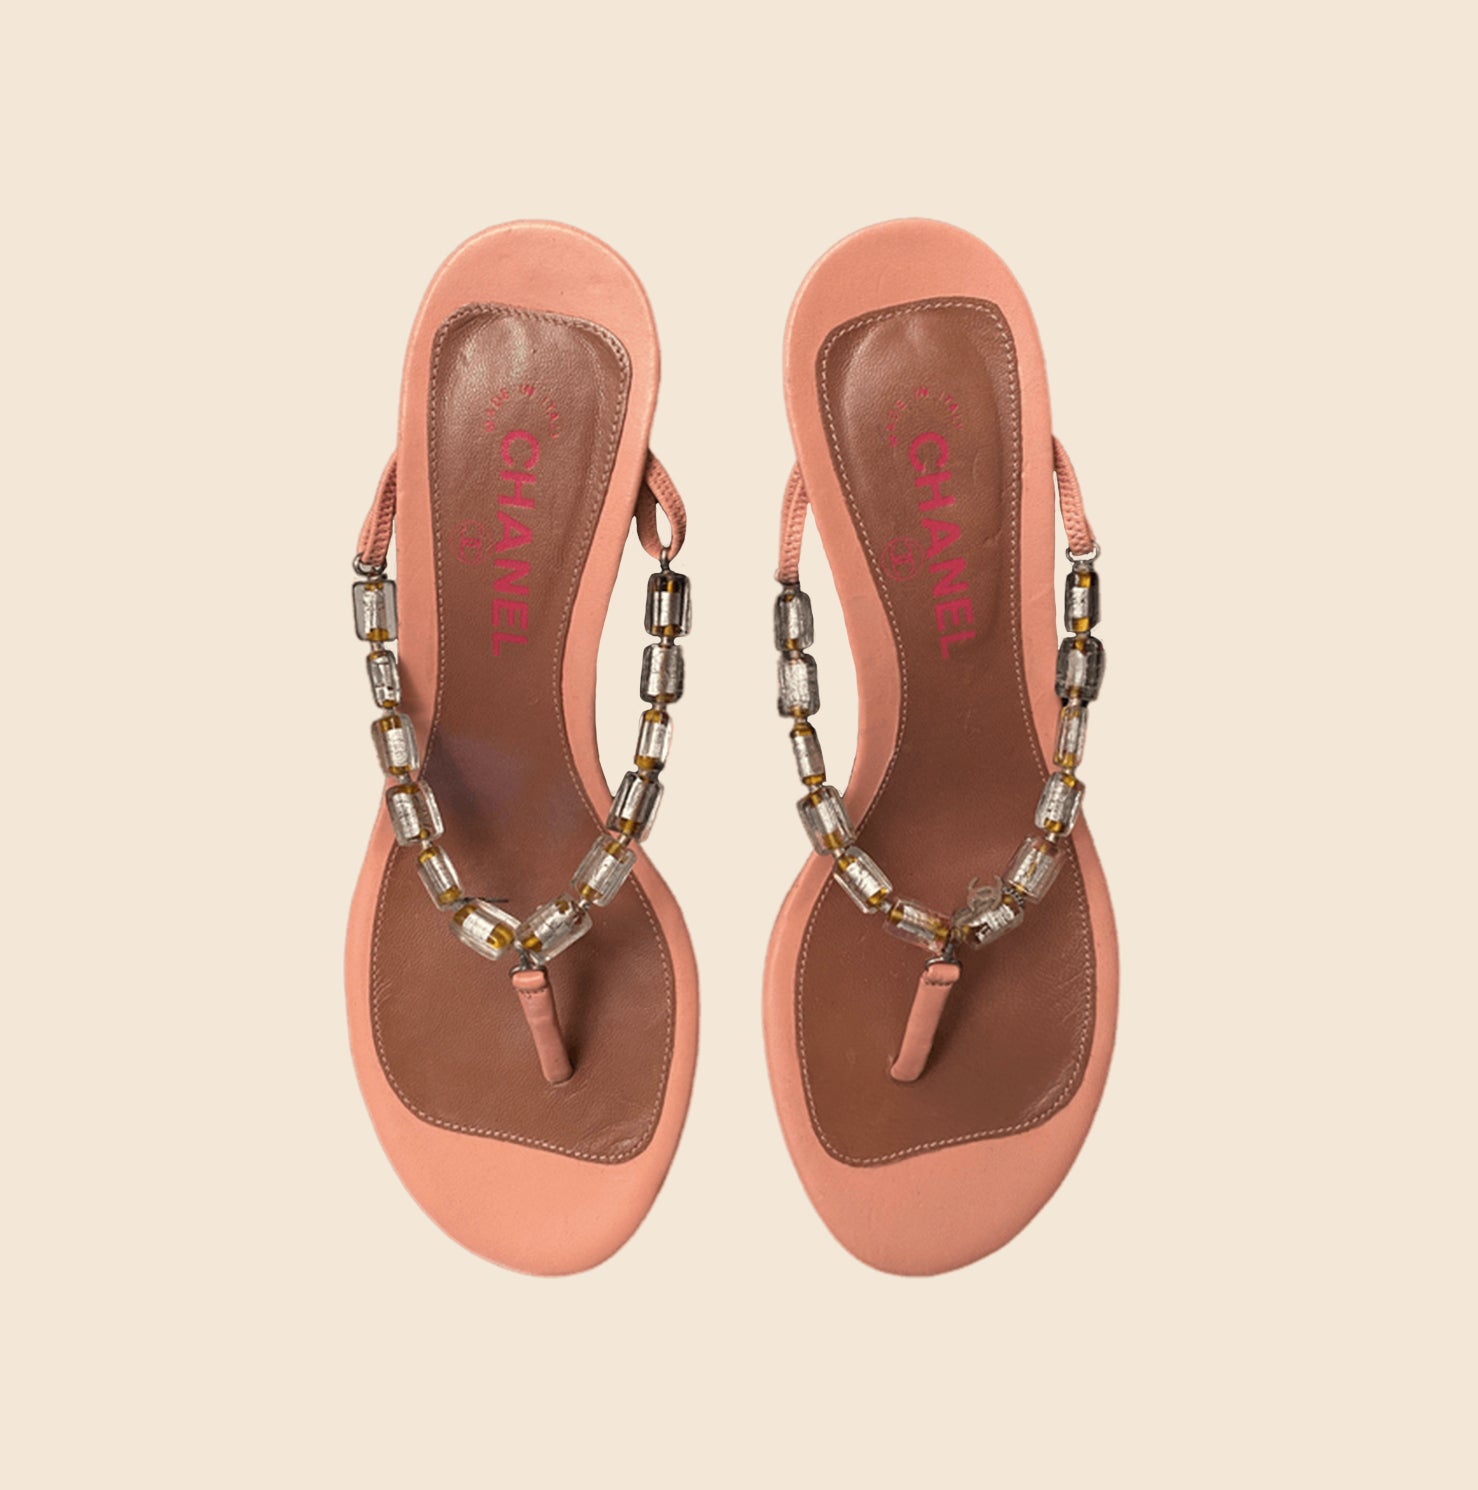 Chanel in Love pink leather sandals with CC logo